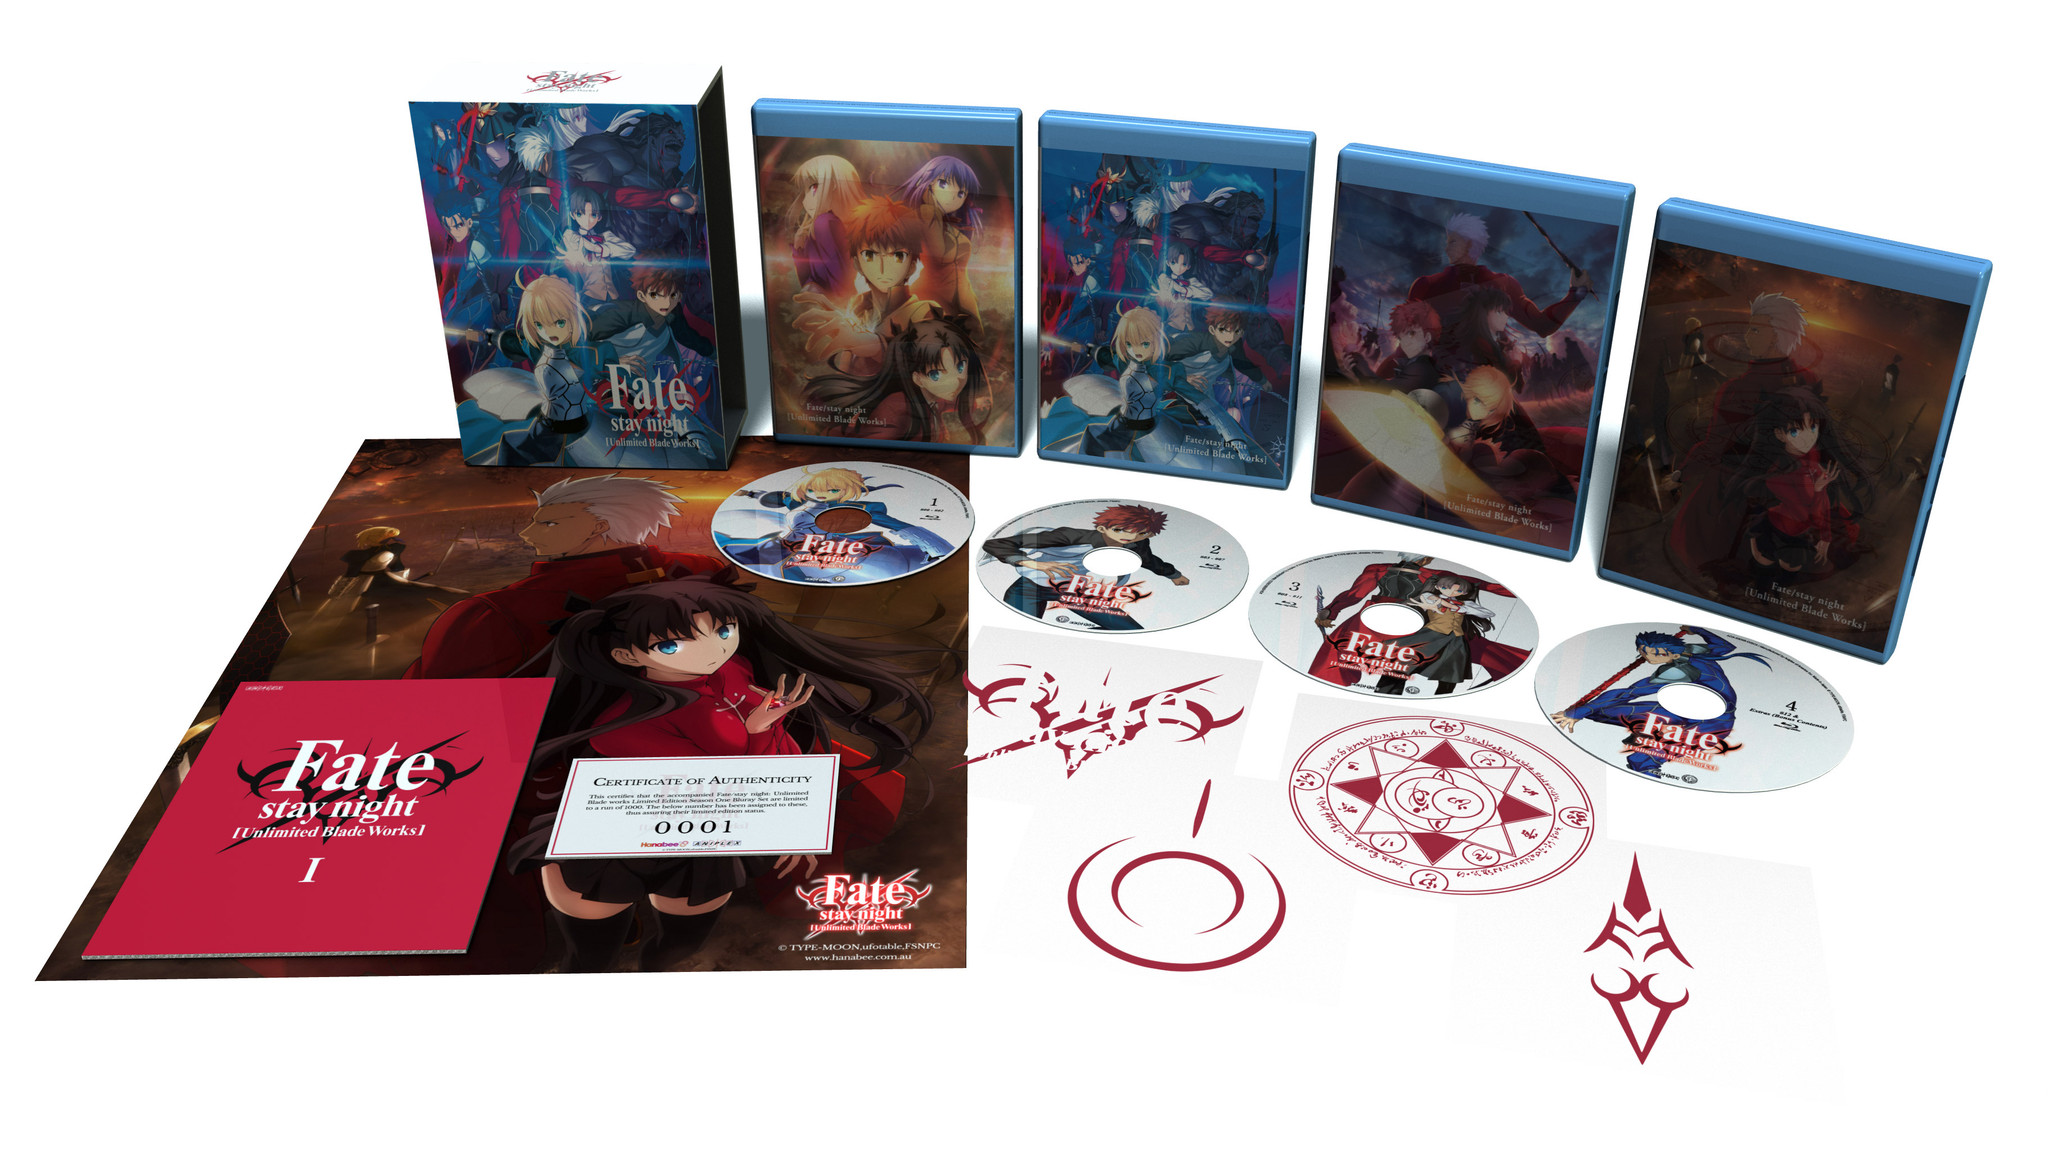 Blu-ray Disc Box  Fate/stay night [Unlimited Blade Works] USA